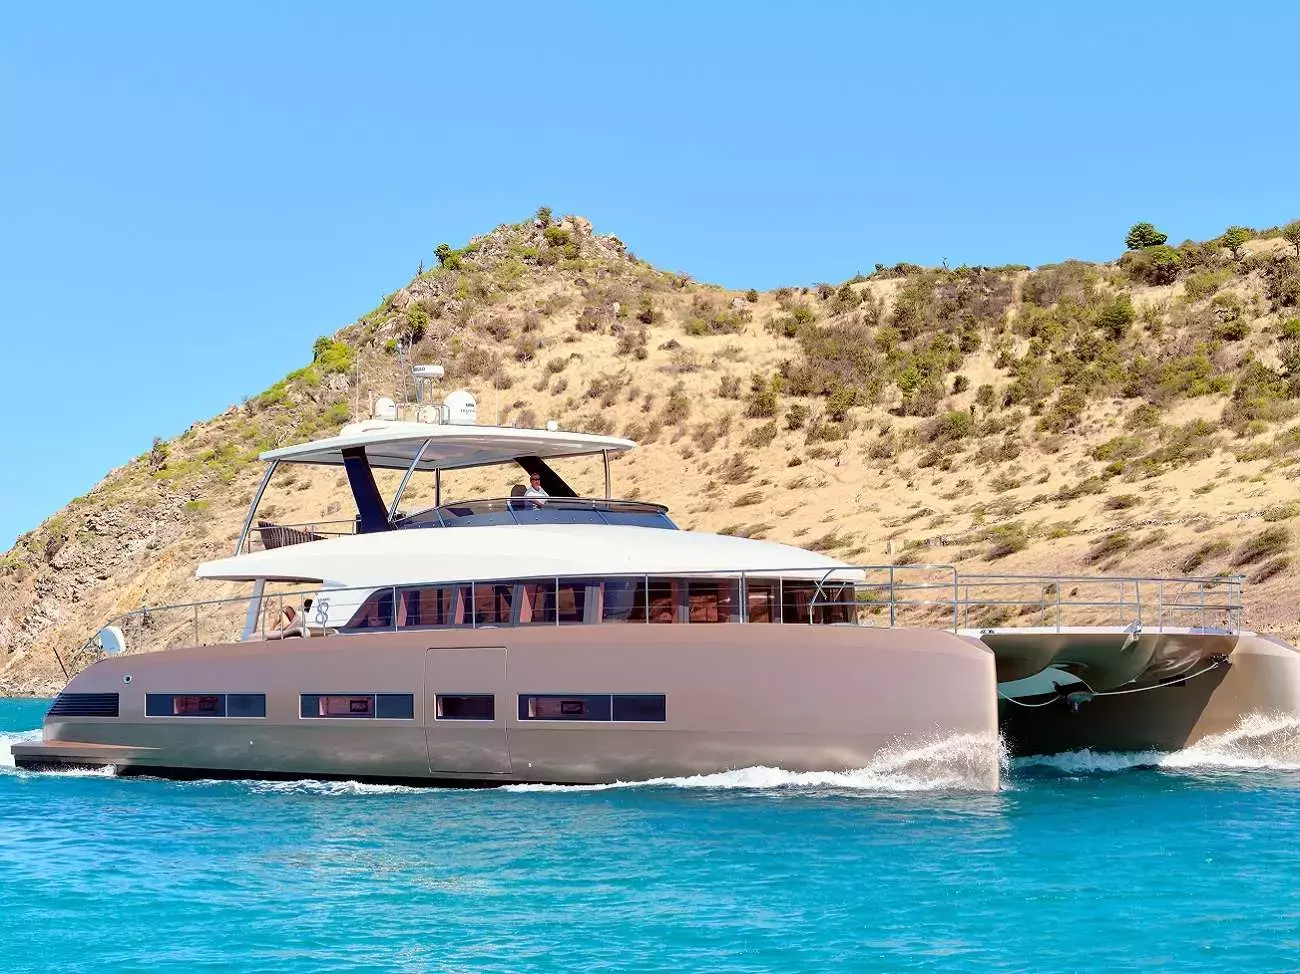 Frenchwest by Lagoon - Top rates for a Rental of a private Power Catamaran in Anguilla